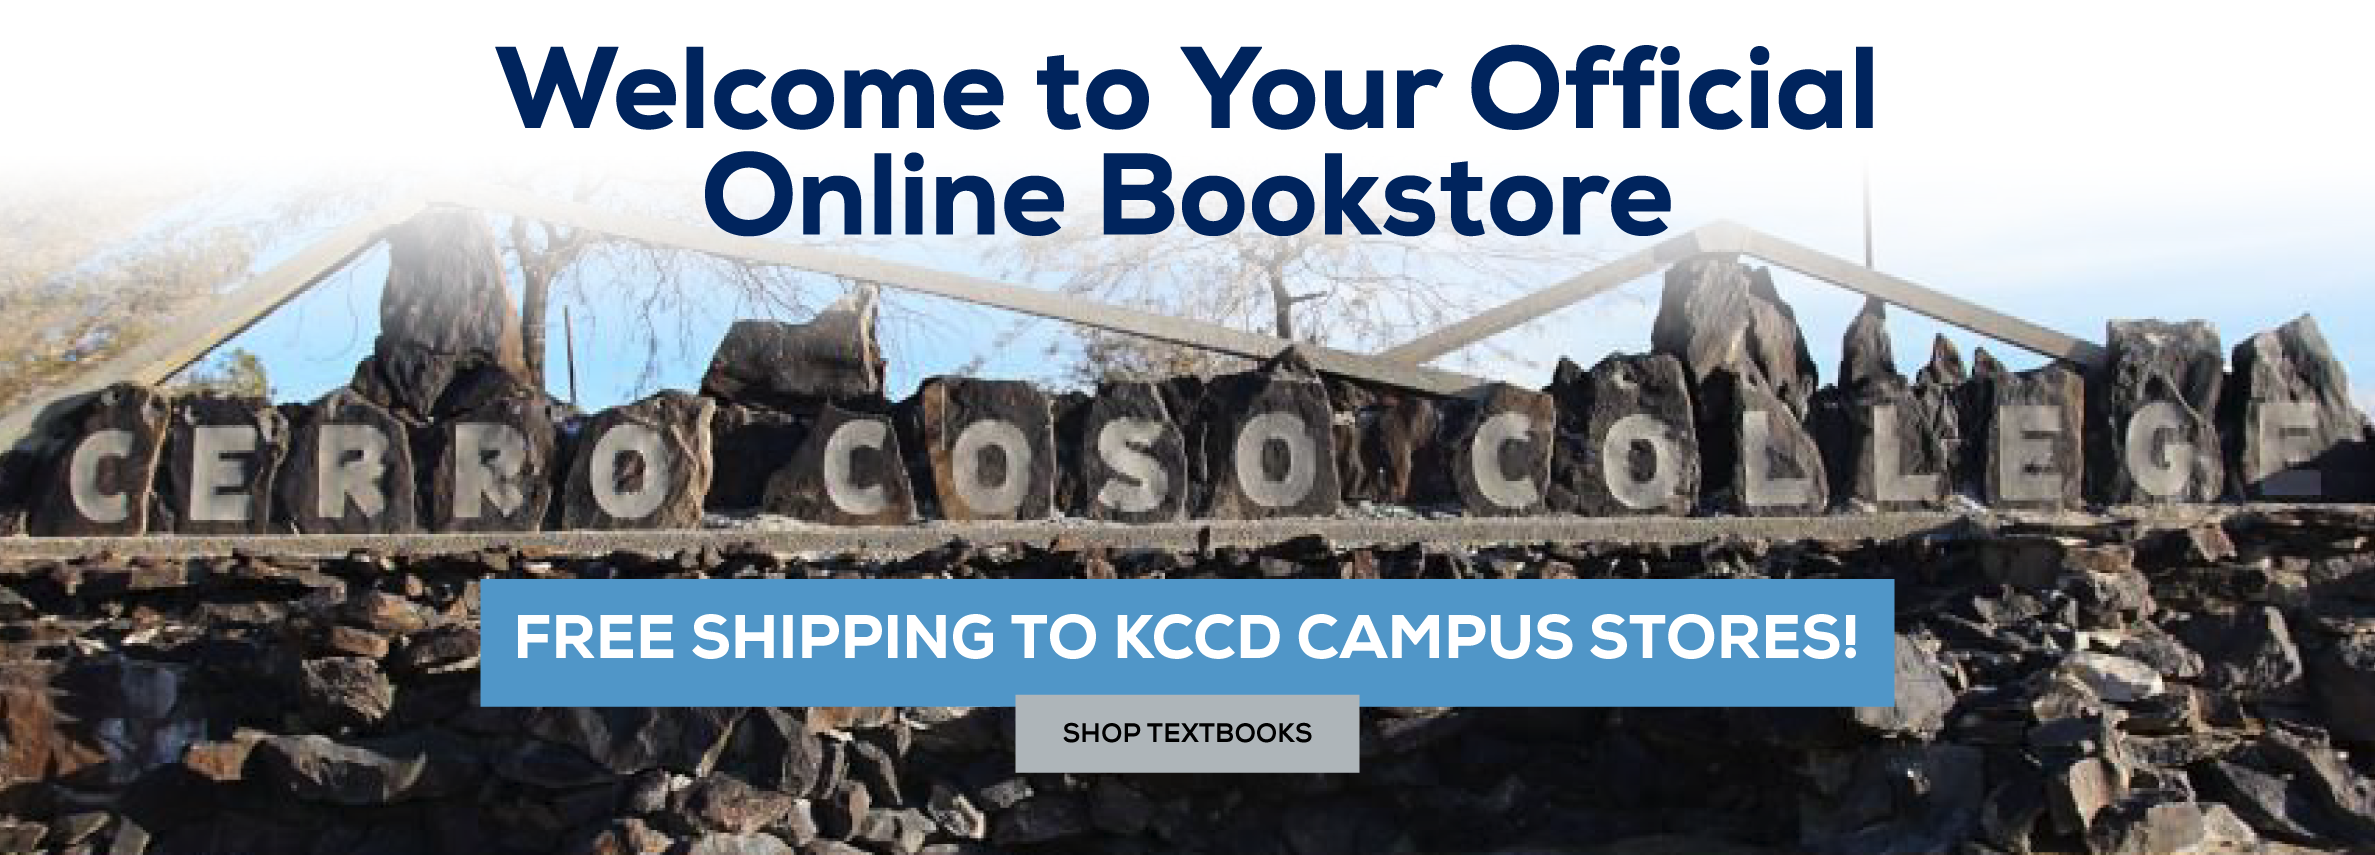 Welcome to Your Official Online Bookstore. Free Shipping to KCCD Campus Stores. Shop Textbooks.